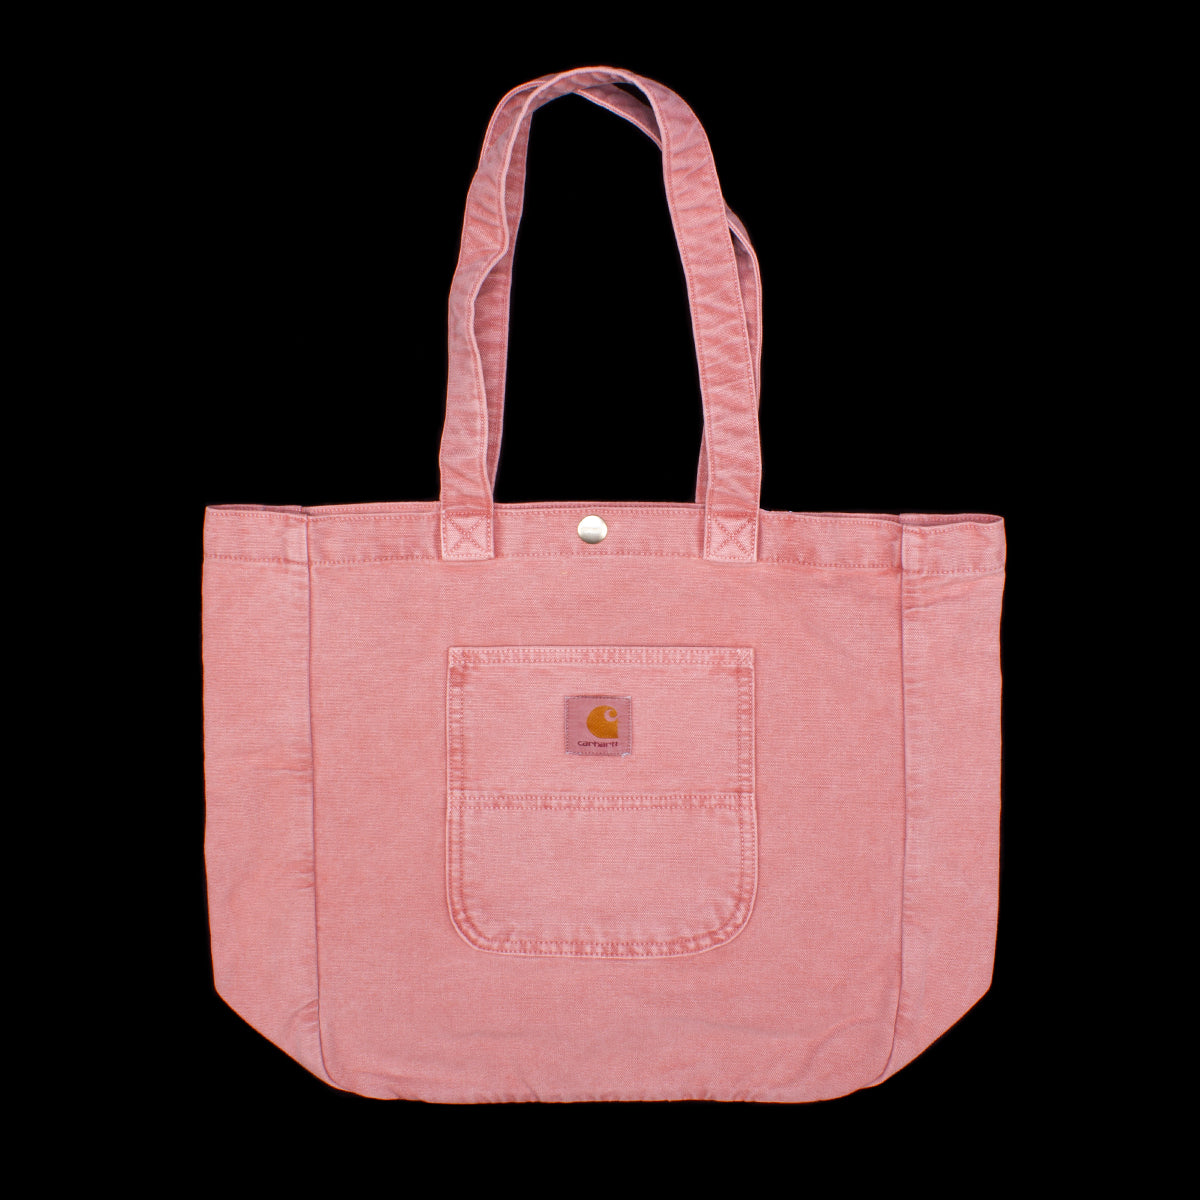 Carhartt WIP Bayfield Tote Small